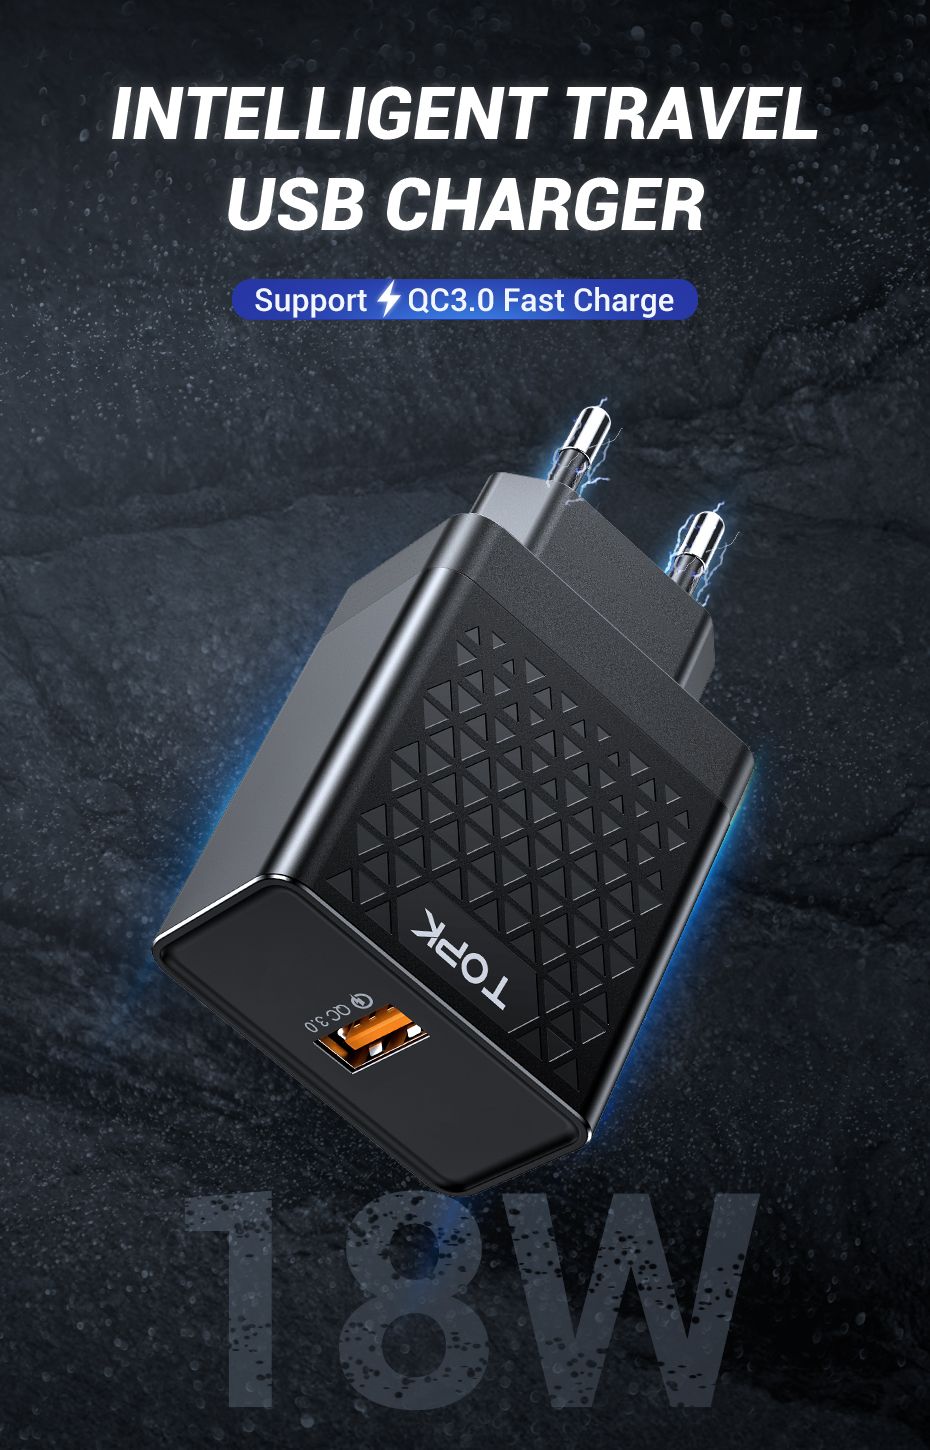 TOPK-18W-QC30-Fast-Charging-USB-Charger-For-iPhone-8-Plus-XS-11-Pro-Huawei-P30-Pro-Mate-30-Mi9-9-Pro-1590236